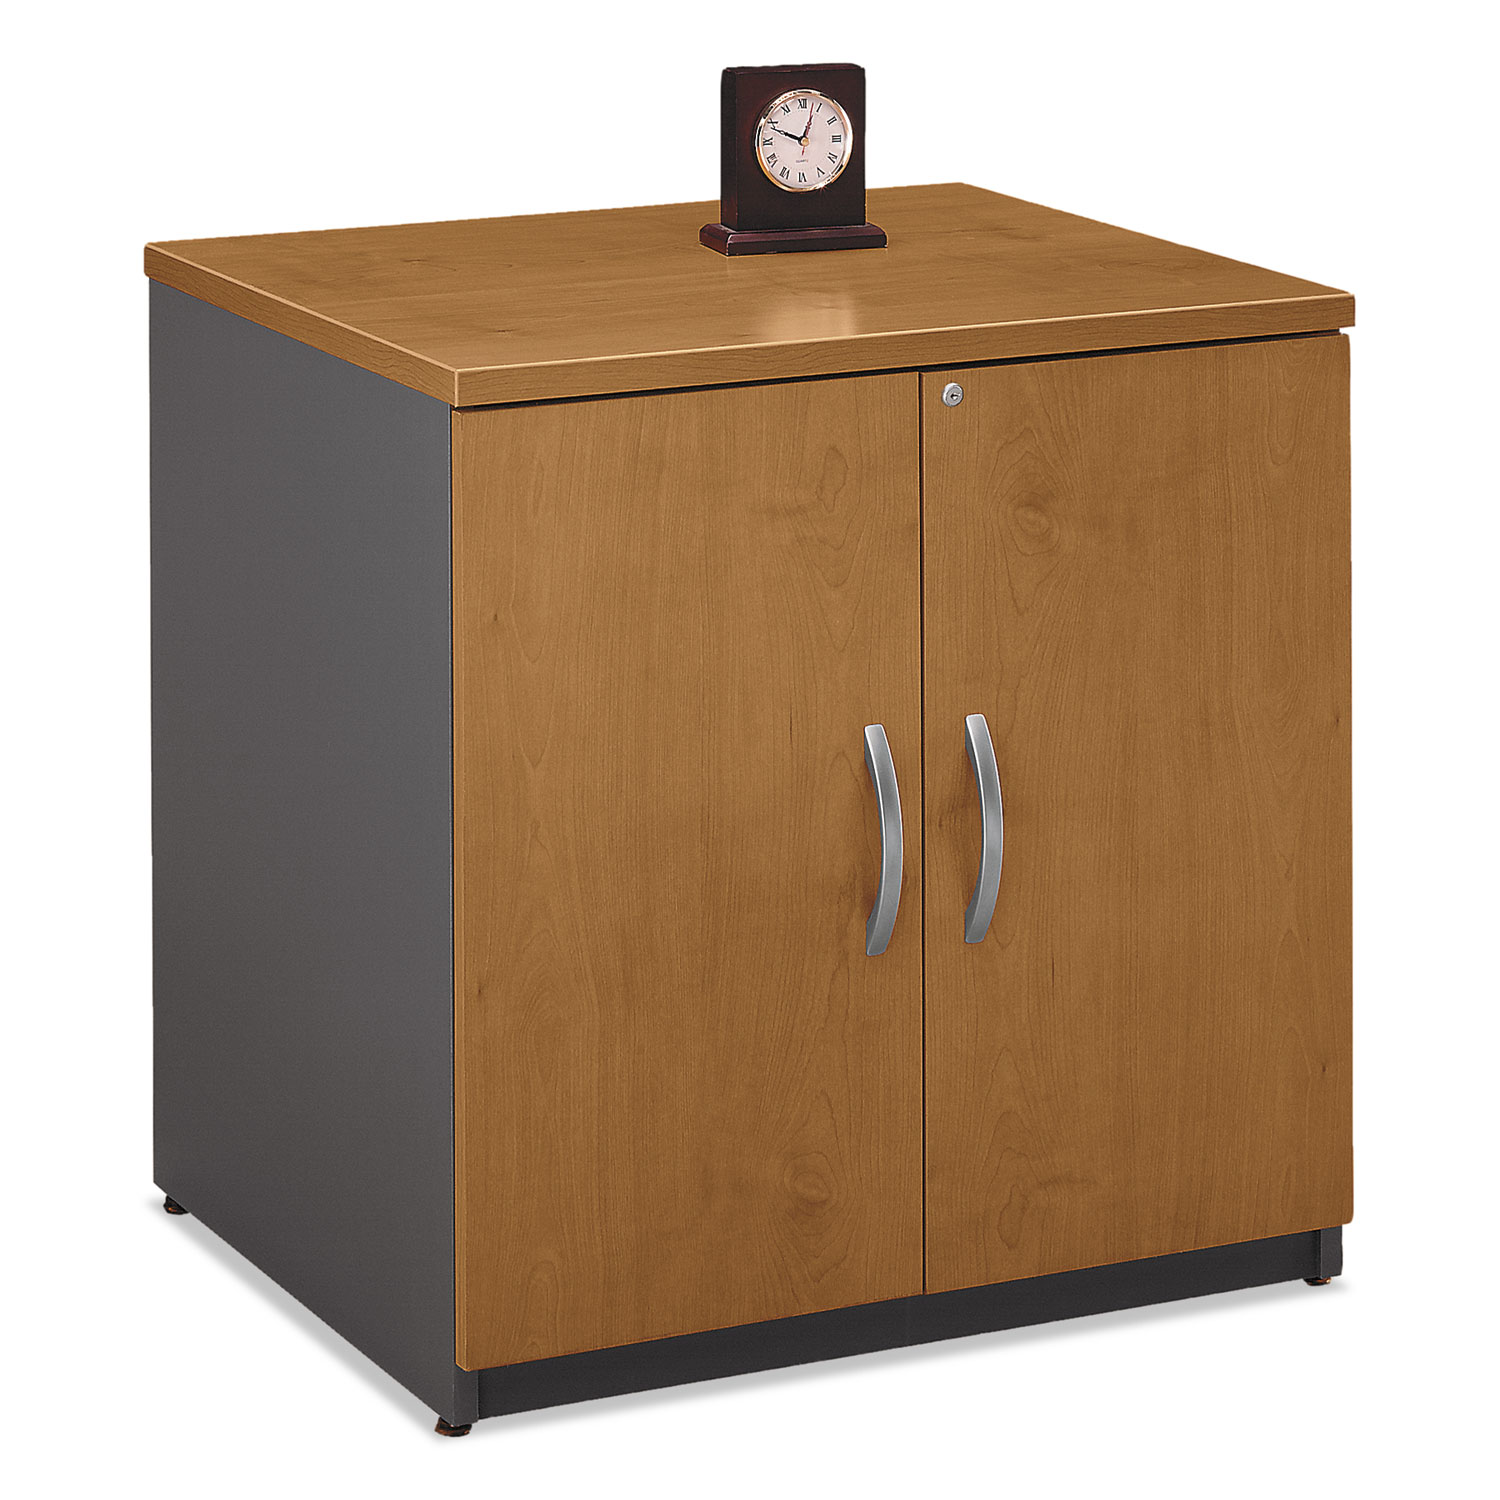  Bush WC72496A Series C Collection 30W Storage Cabinet, Natural Cherry (BSHWC72496A) 